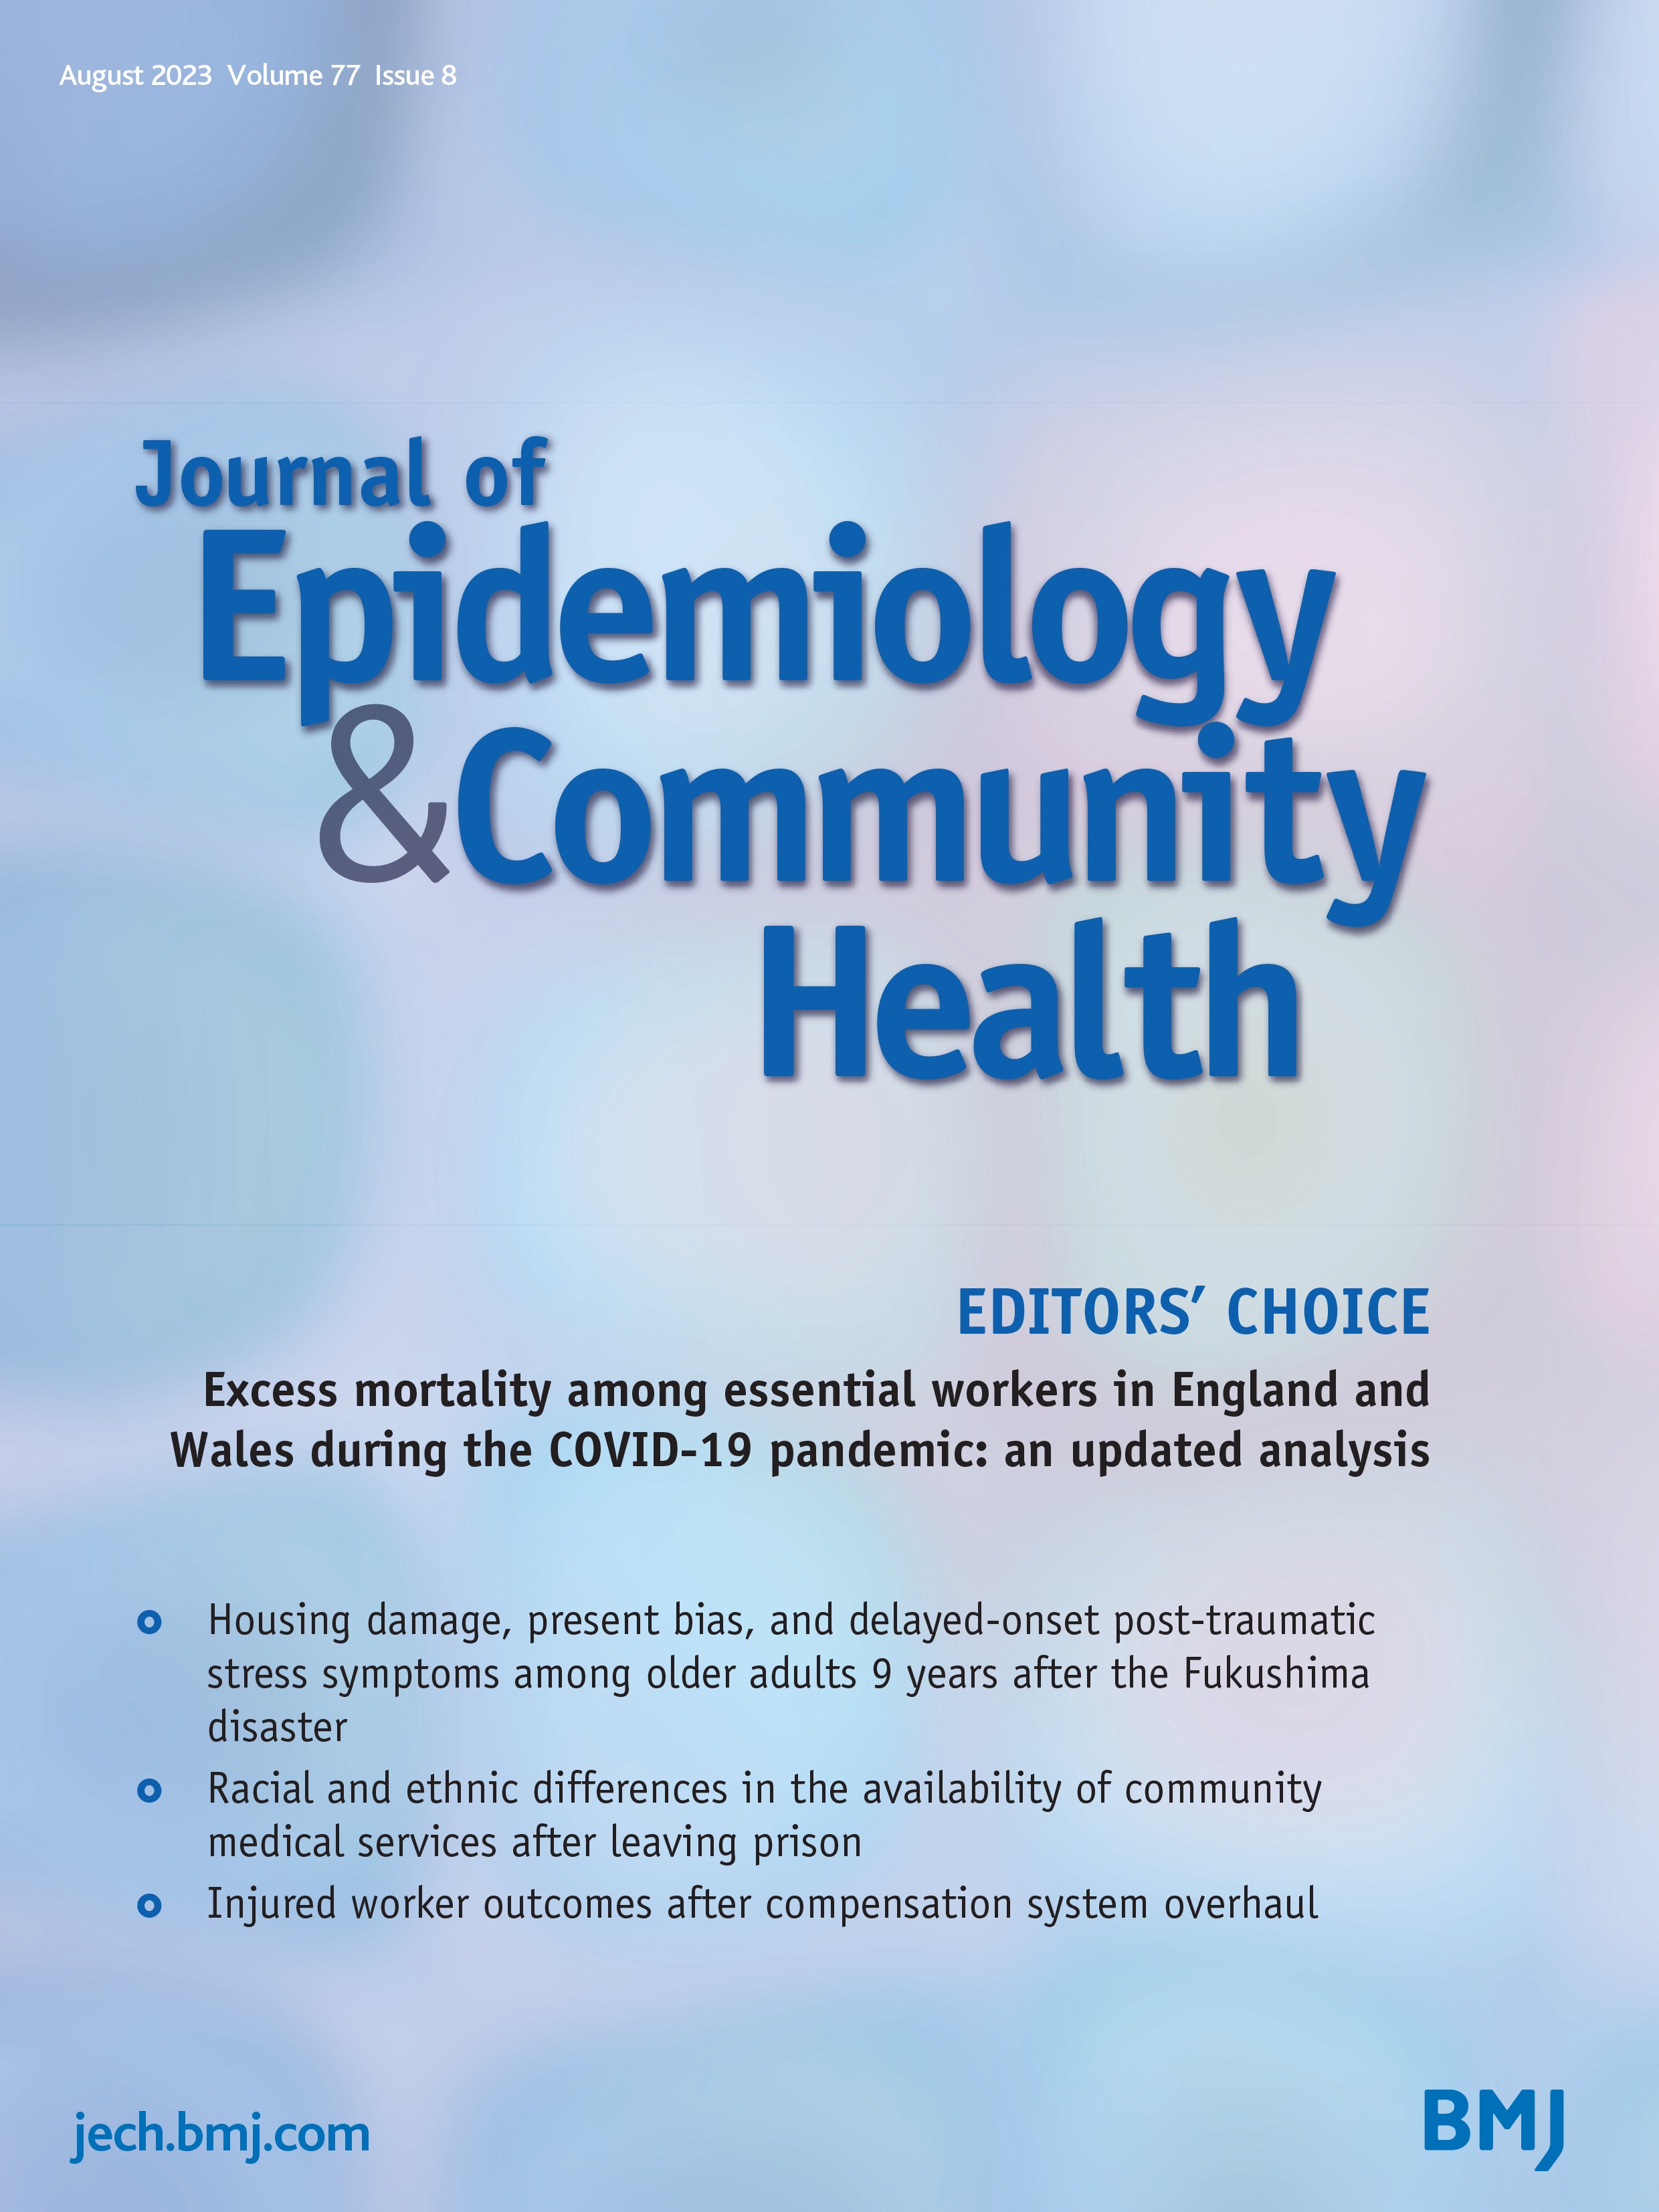 Racial and ethnic differences in the availability of community medical services after leaving prison